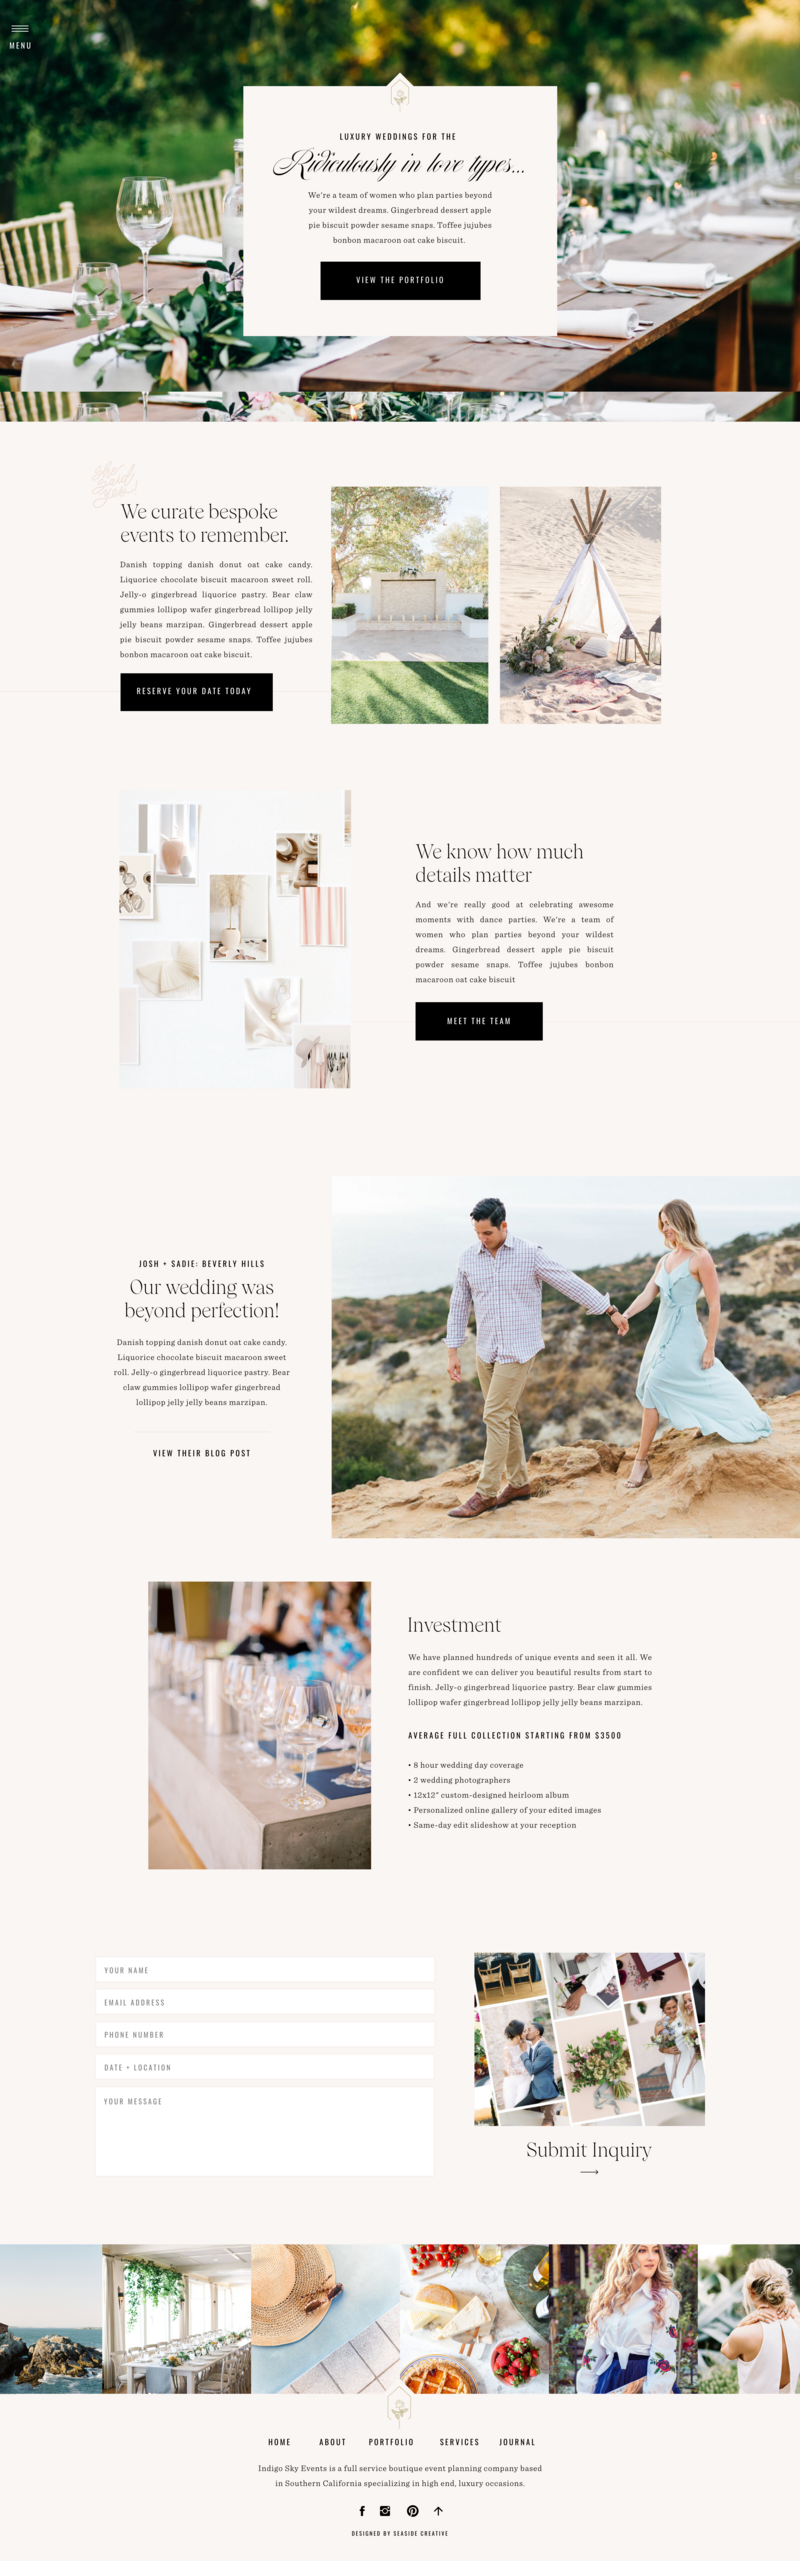 Indigo Is a Modern and Professional Showit Website Template for Wedding & Event Planners That Provide World Class Service for Luxury Celebrations.